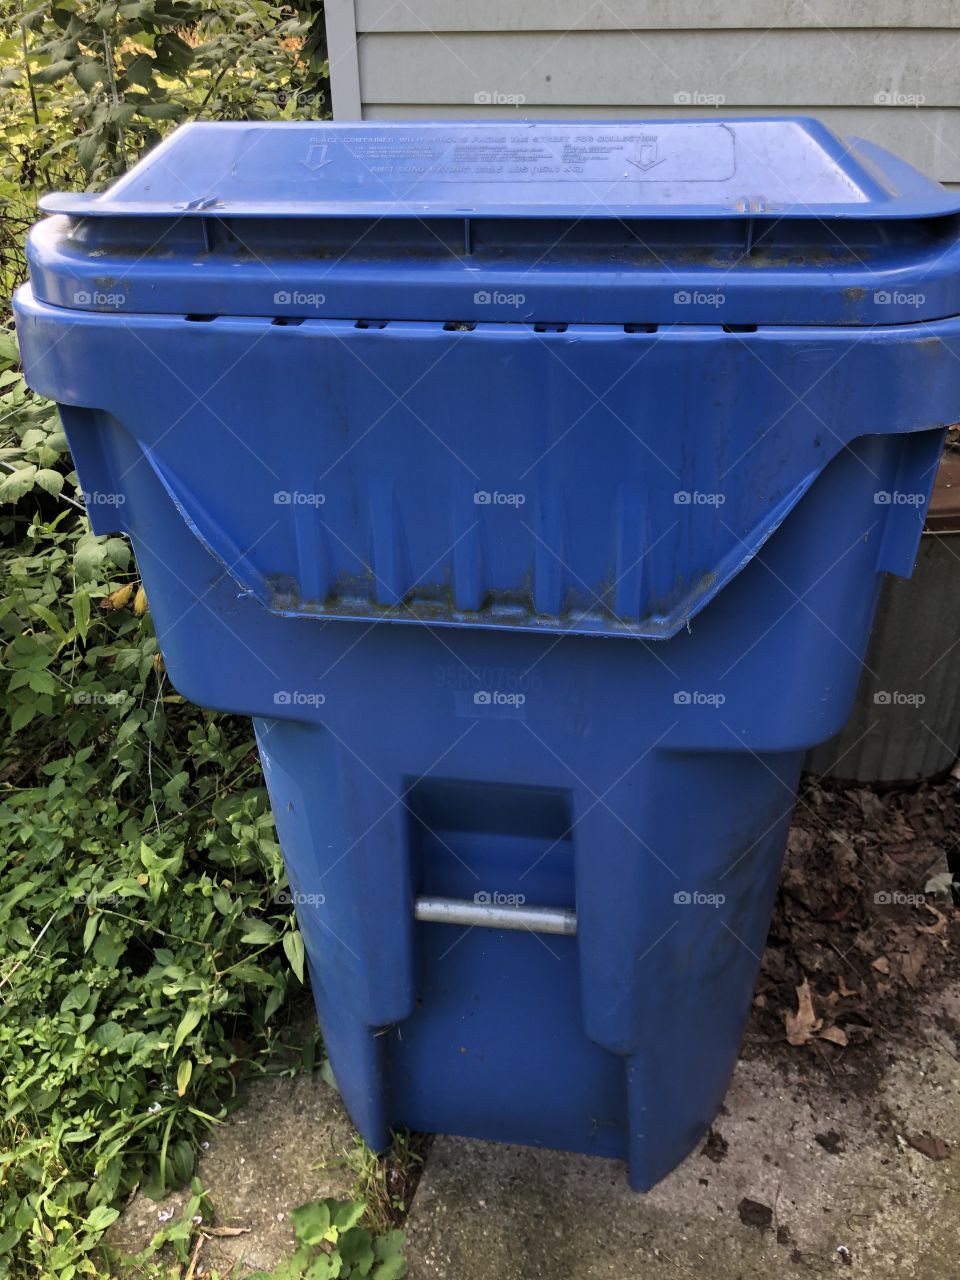 Recycling cans outside